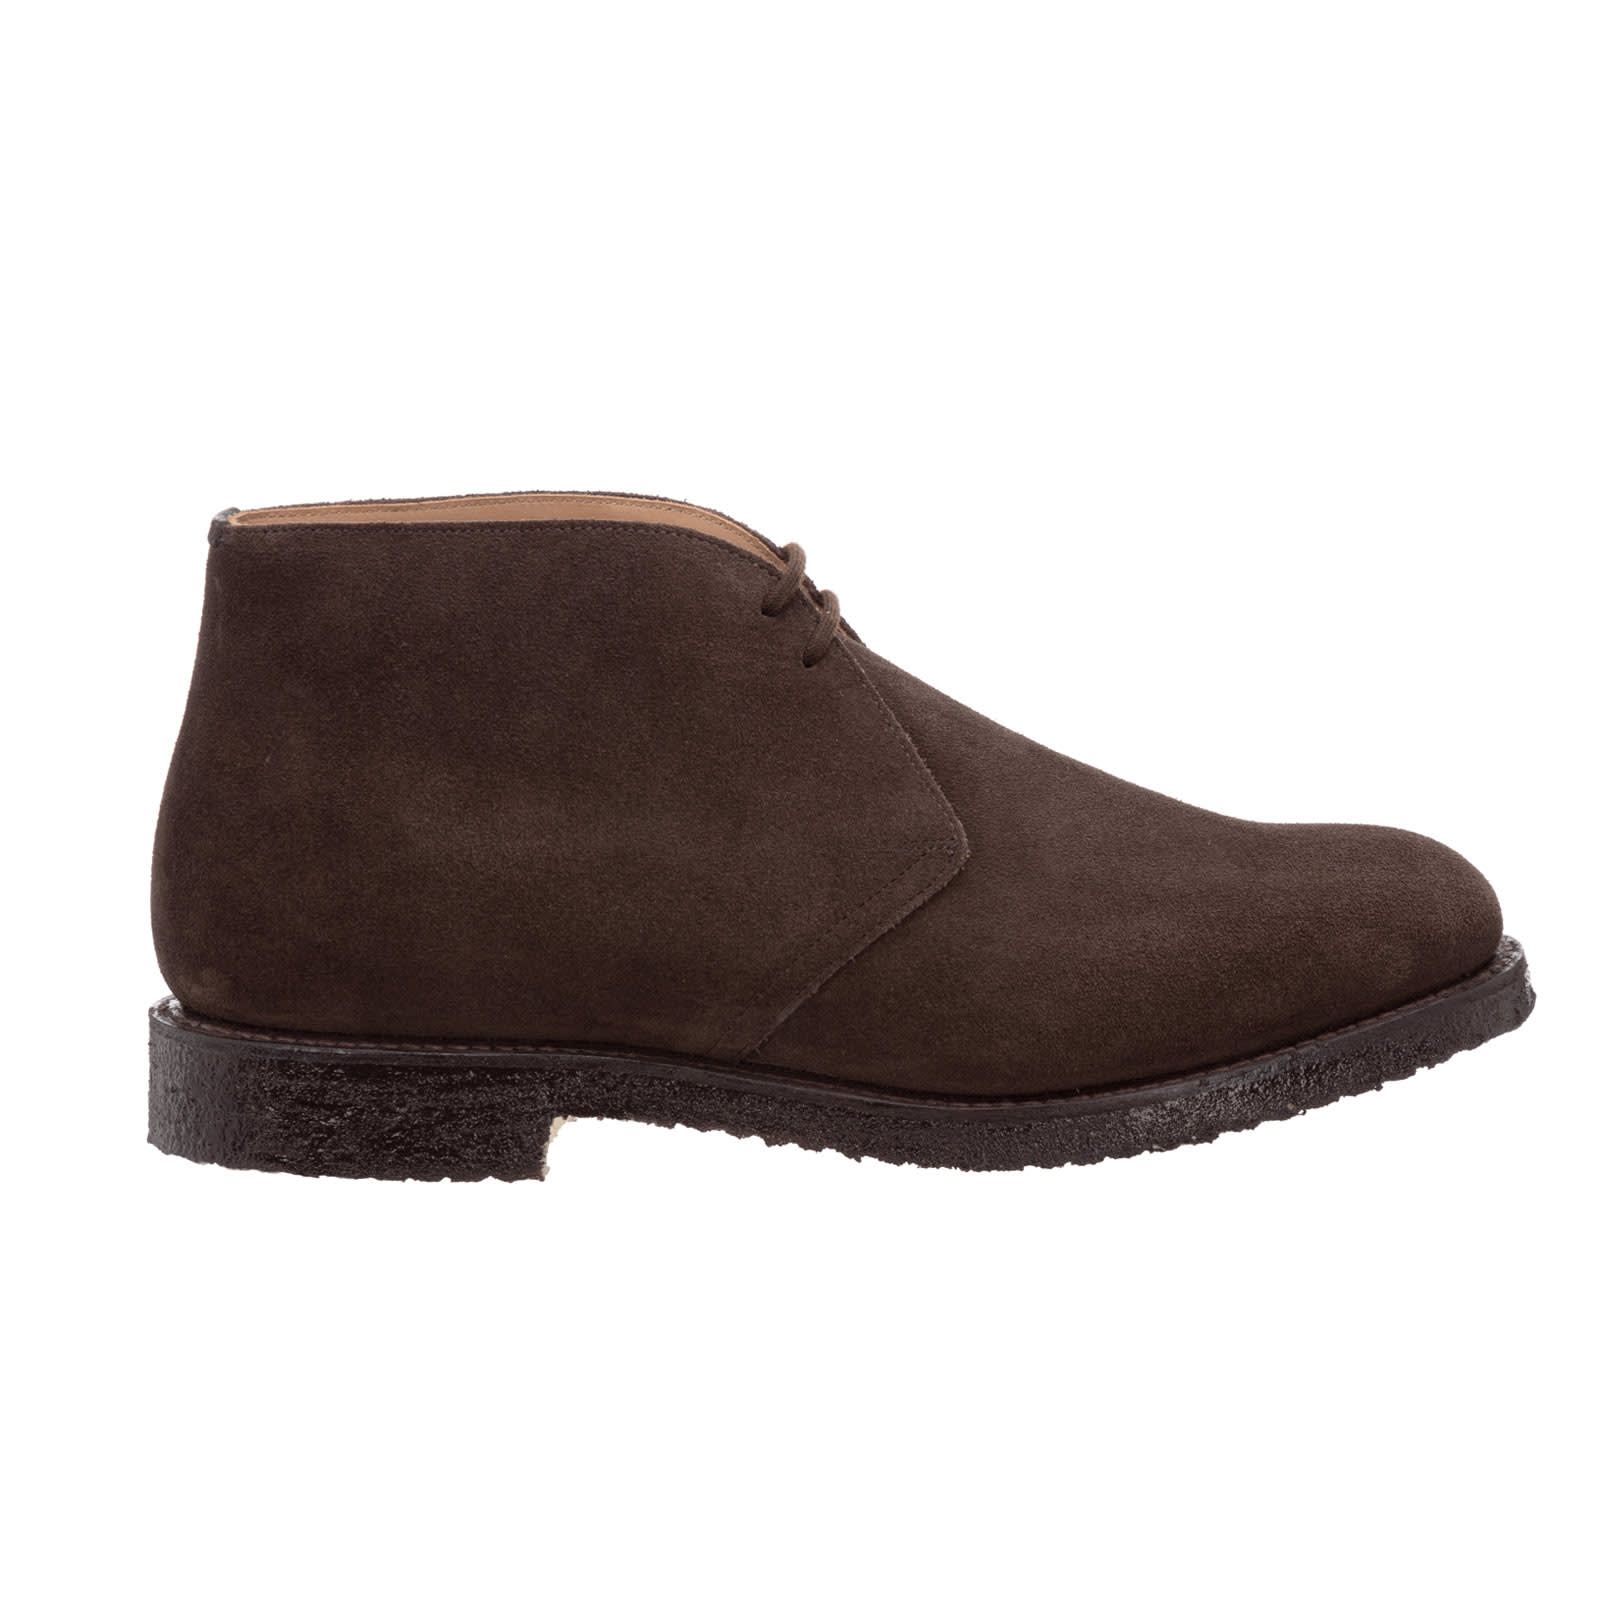 Churchs Ryder 81 Ankle Boots